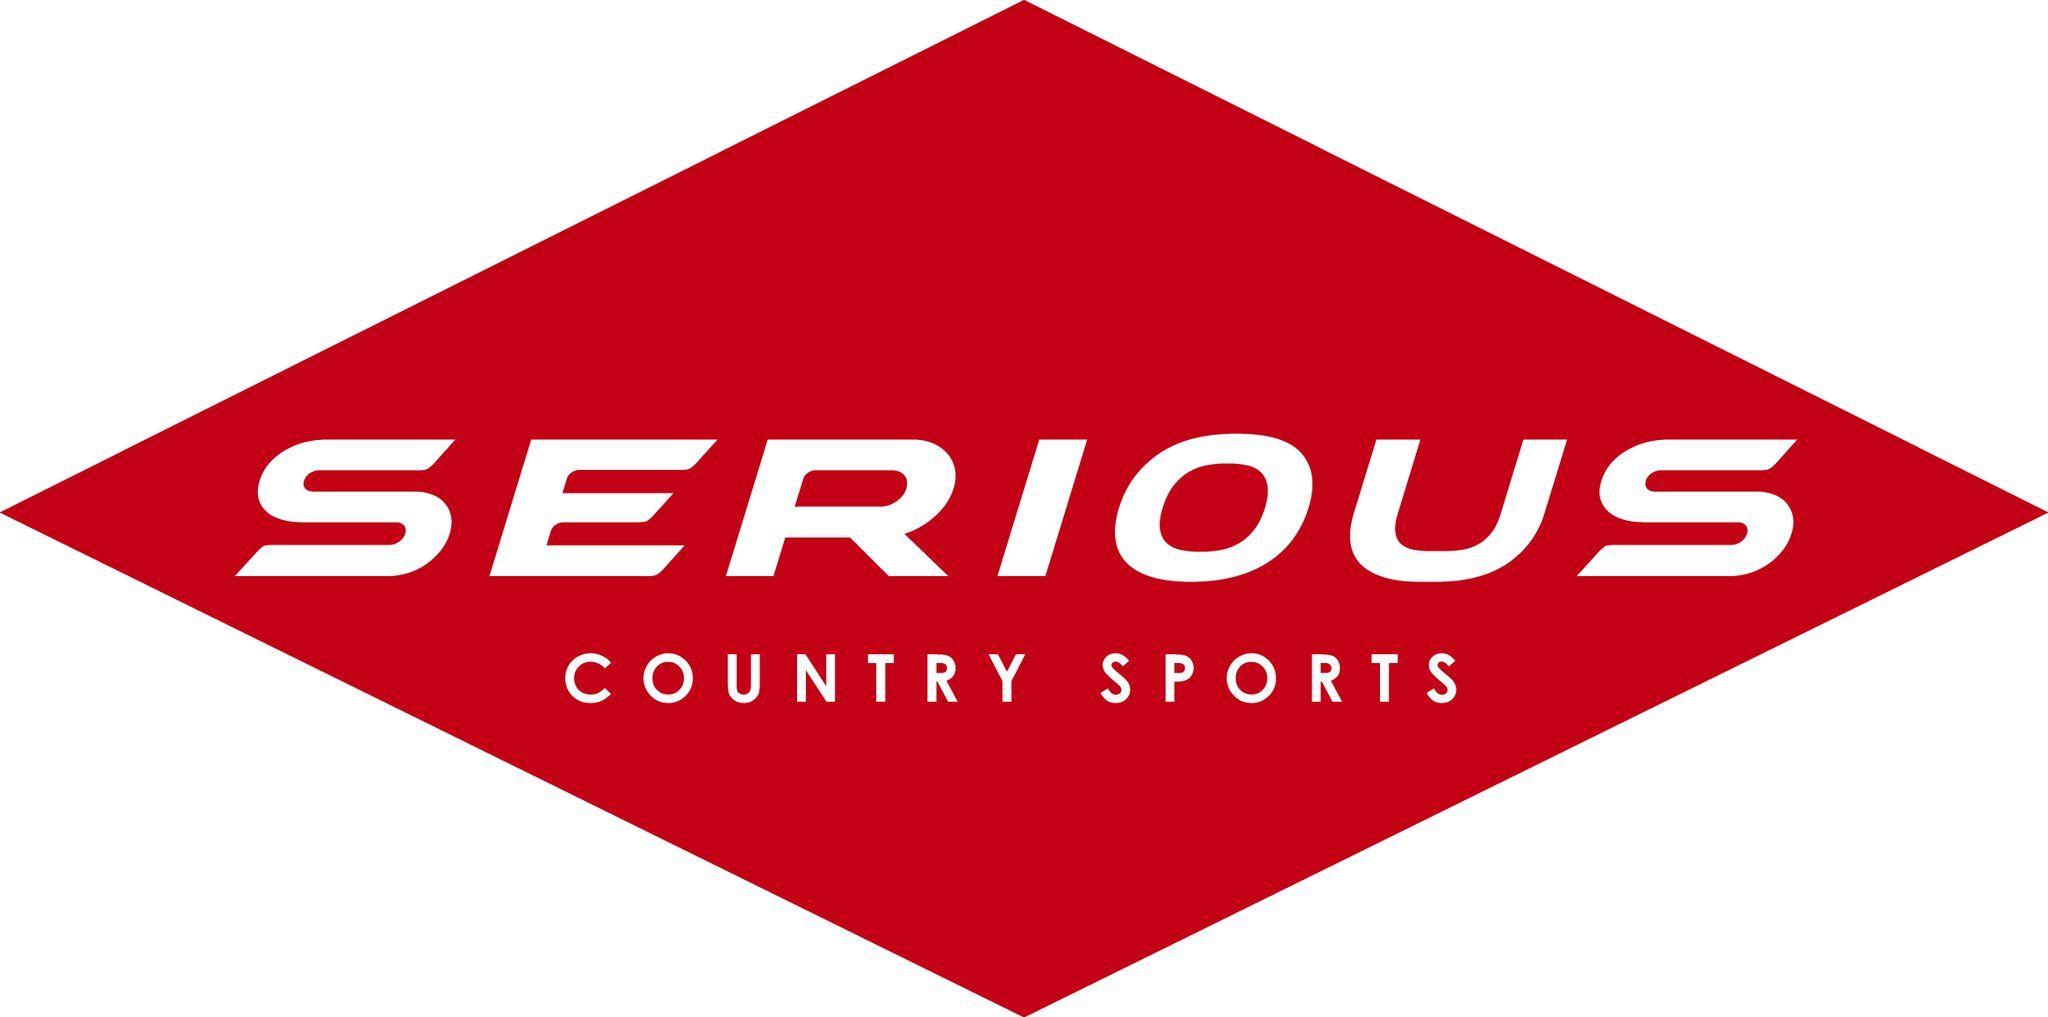 Country Sports Logo - Hunting Boots - Serious Country Sports UK